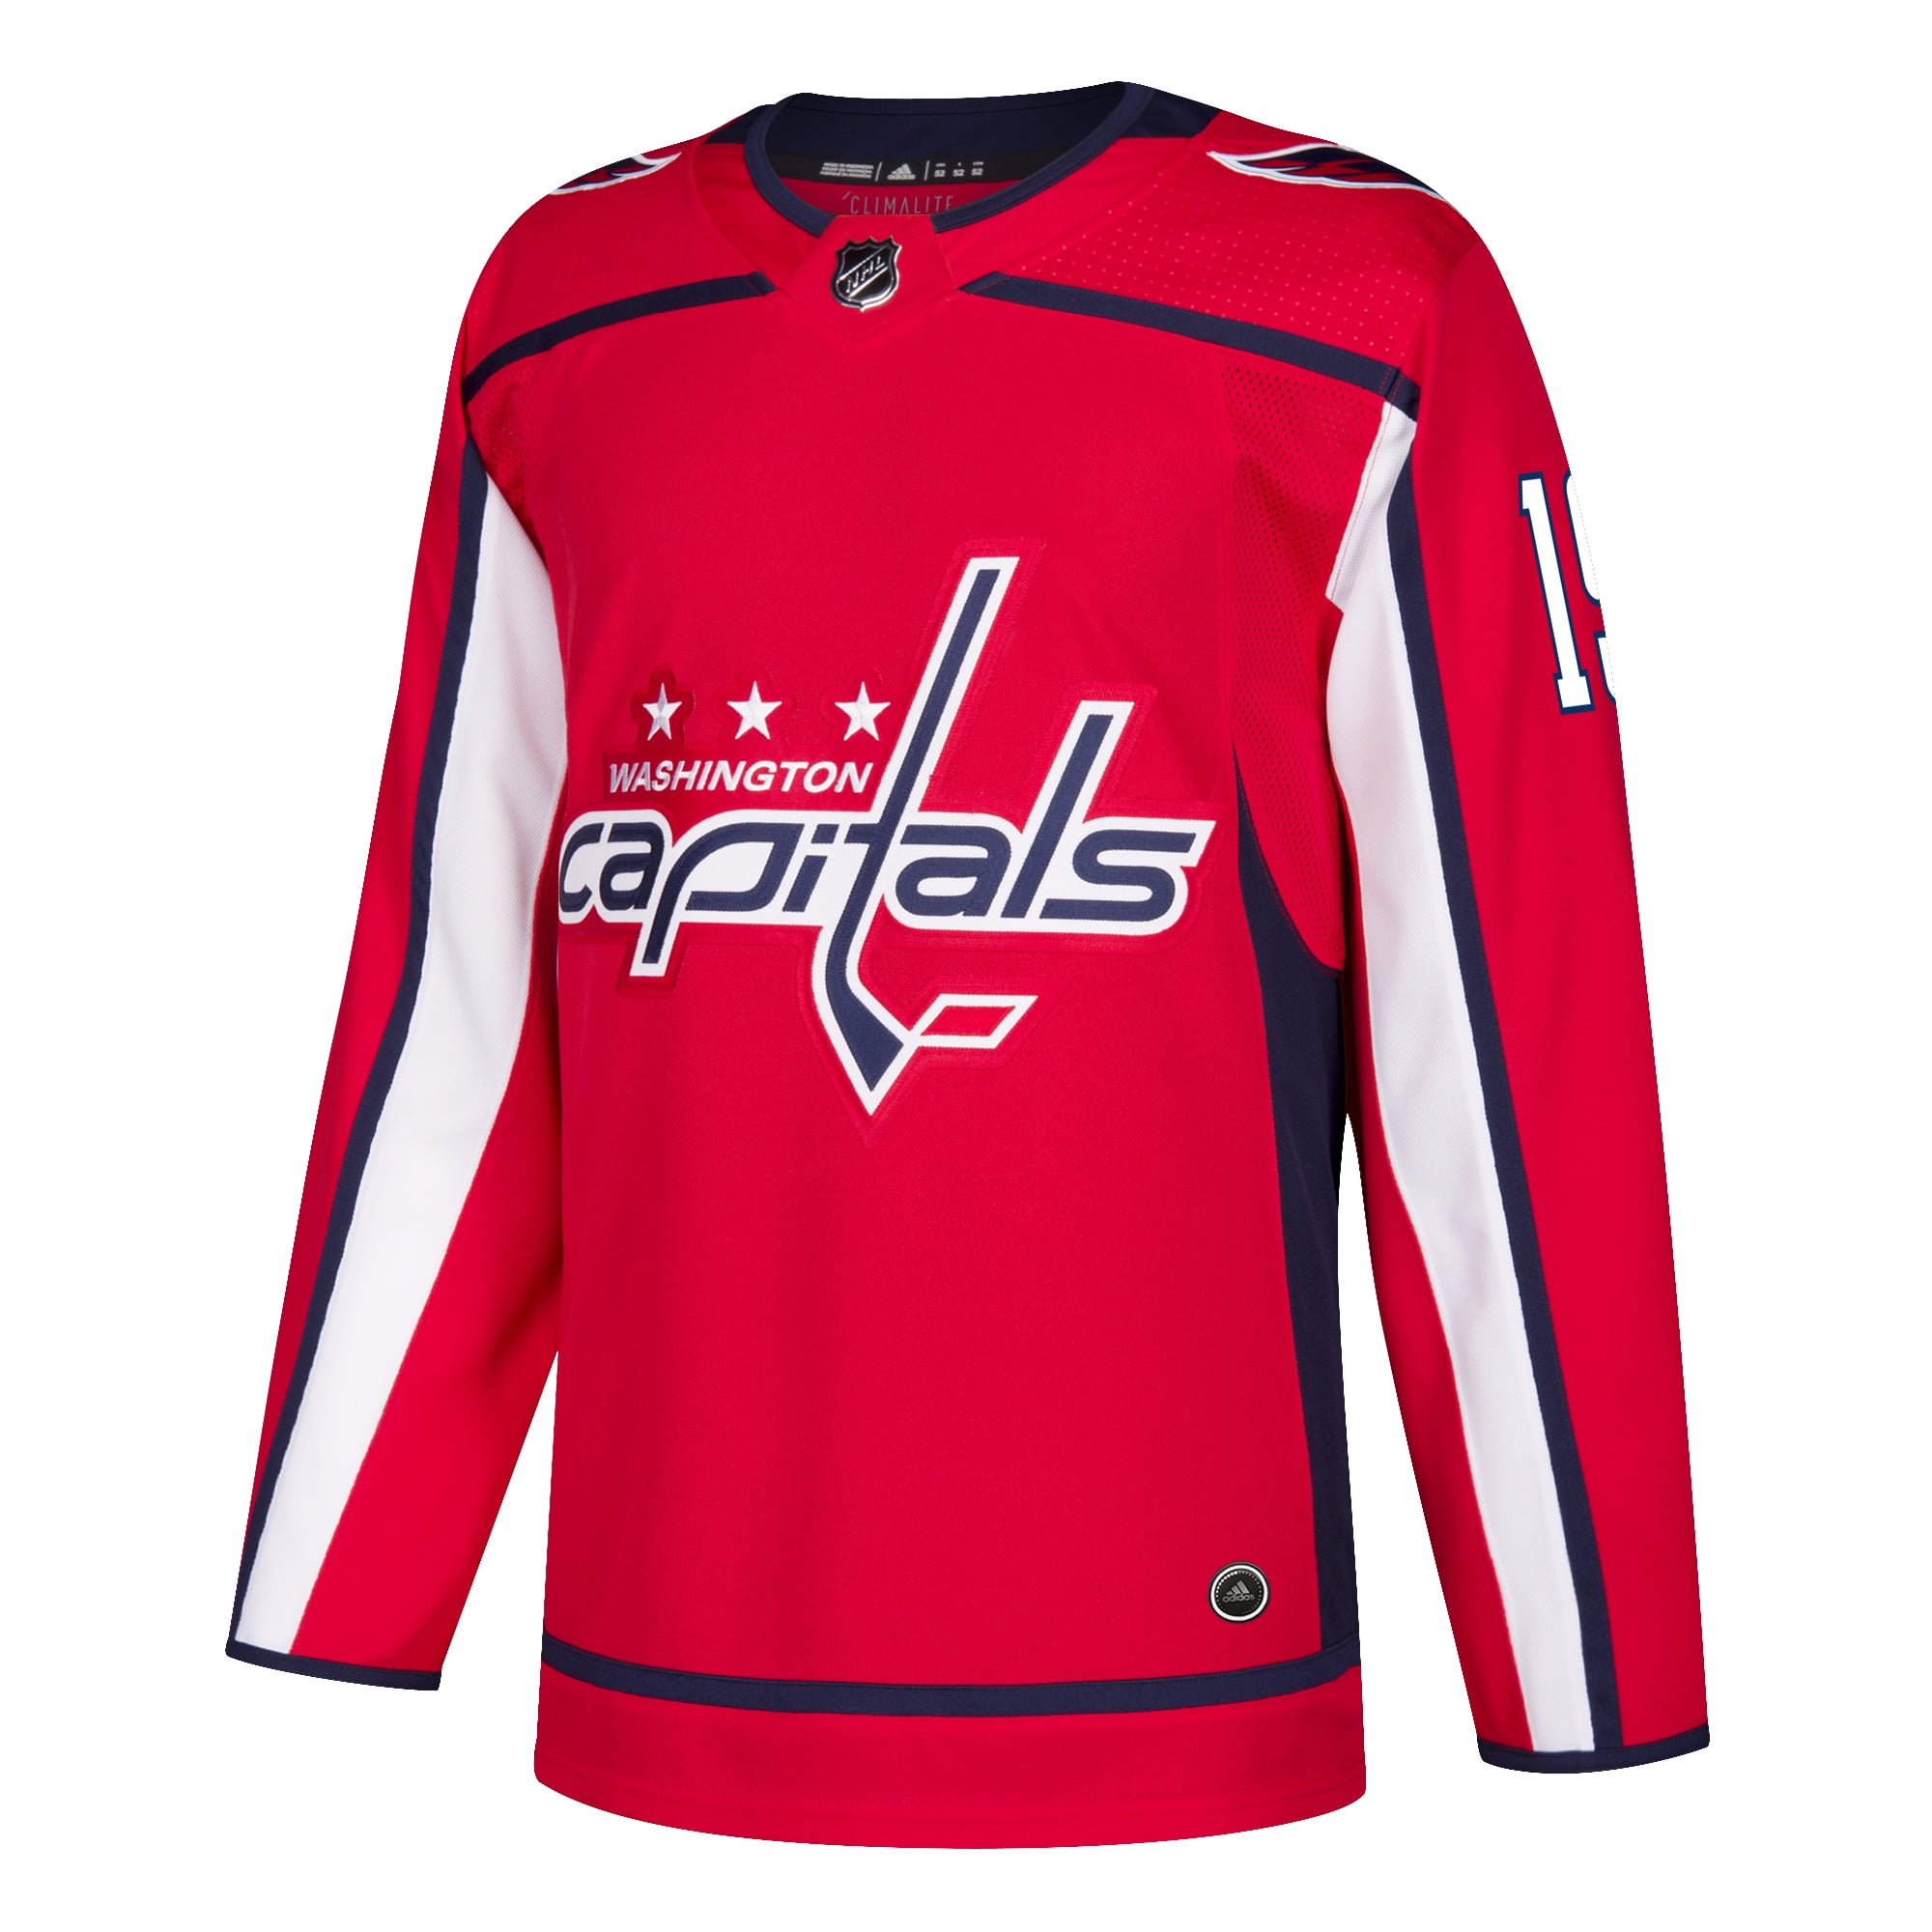 holtby capitals jersey